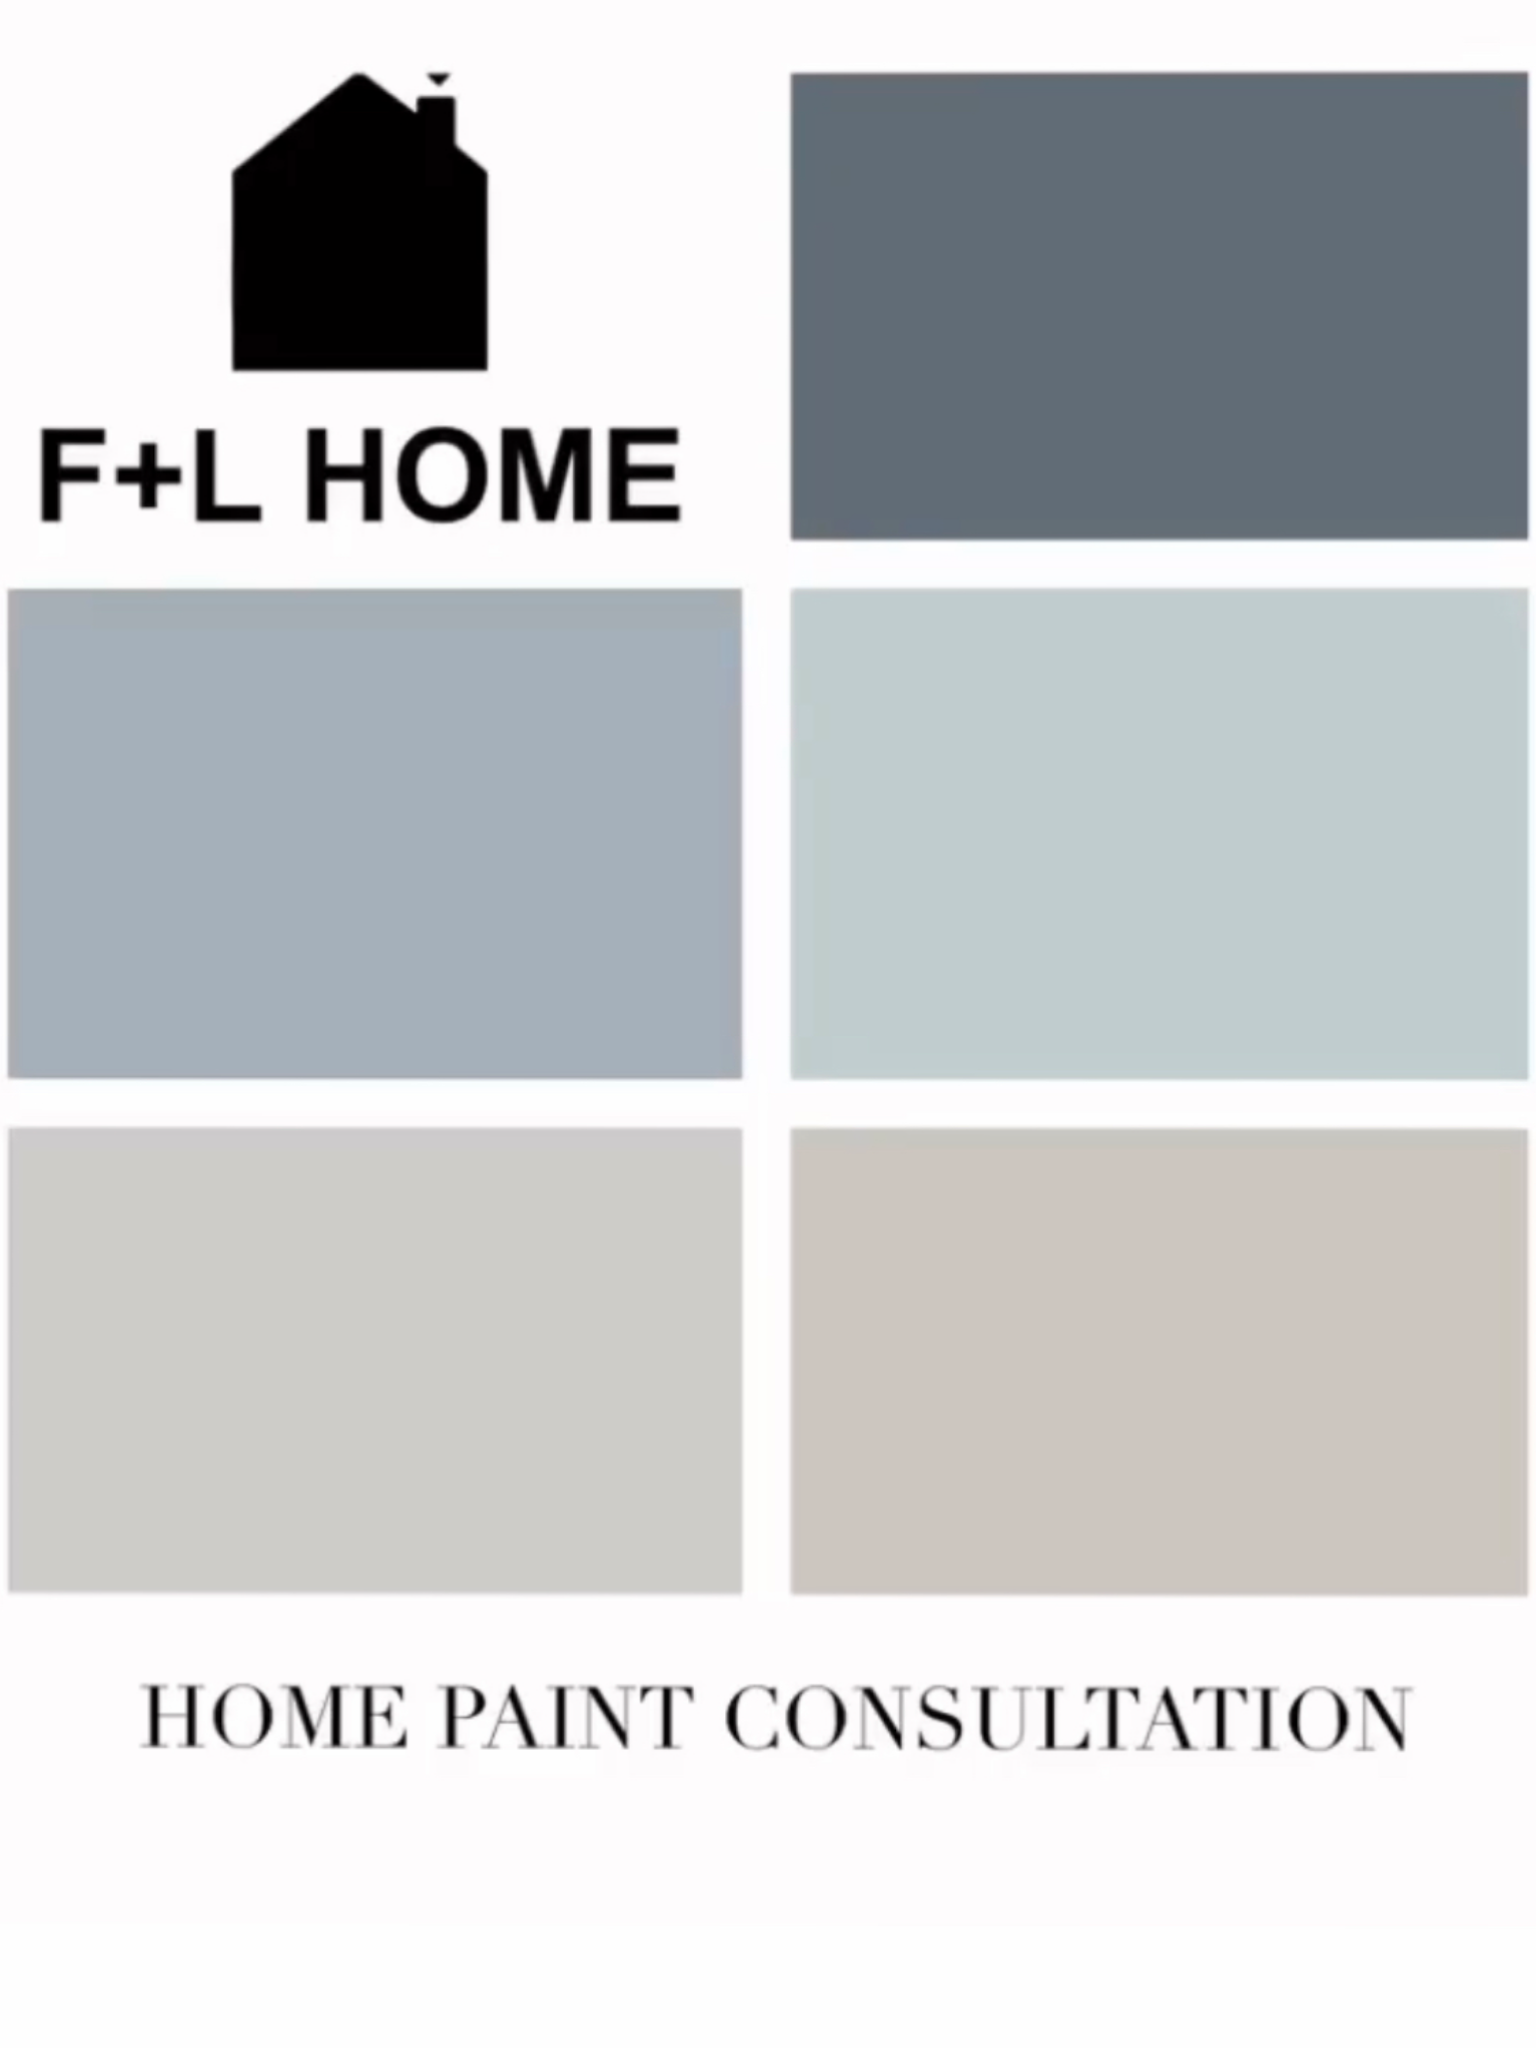 Paint Color Consultation from F+L Home